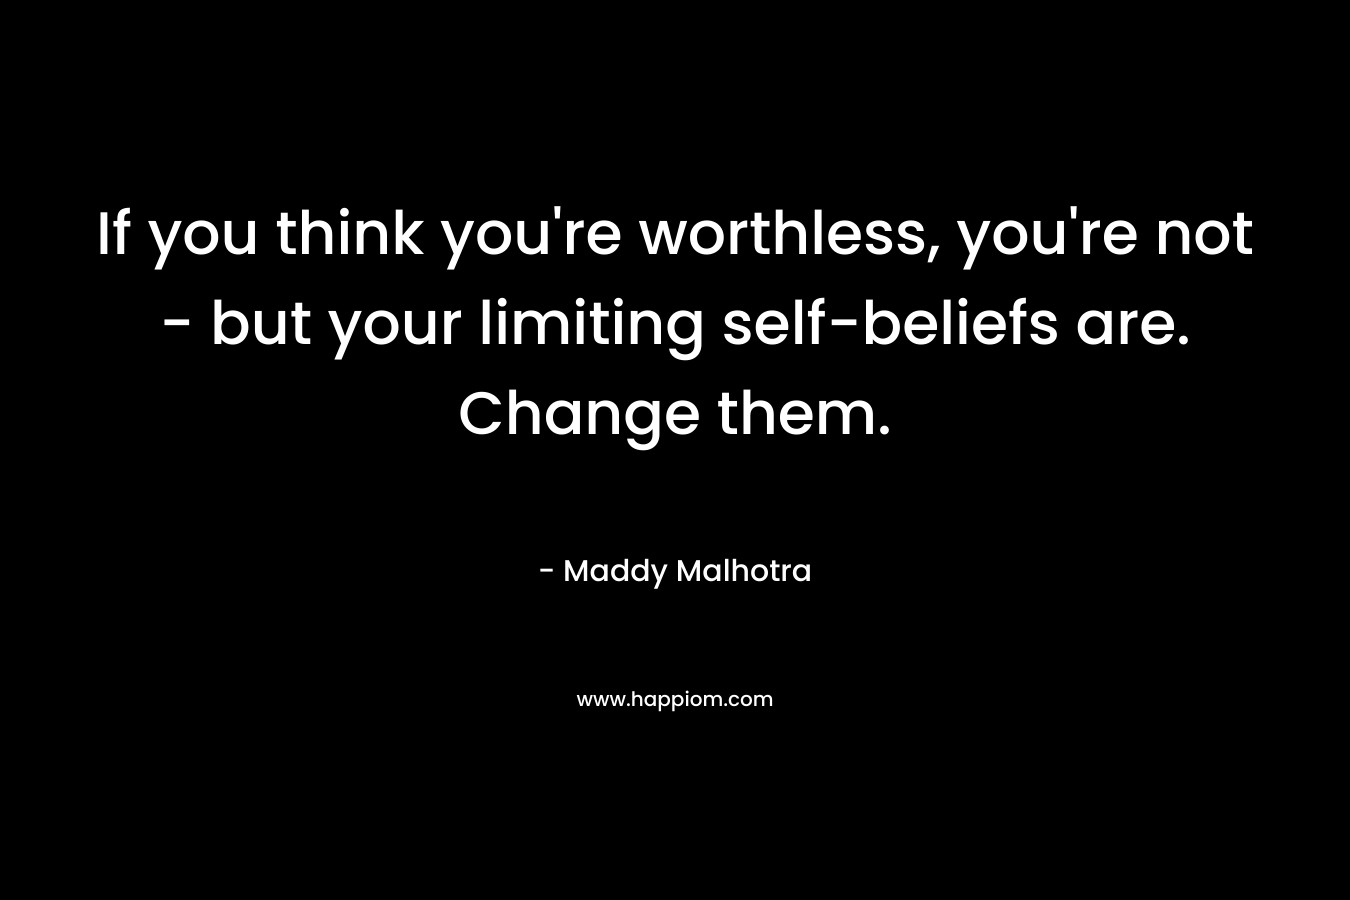 If you think you’re worthless, you’re not – but your limiting self-beliefs are. Change them. – Maddy Malhotra